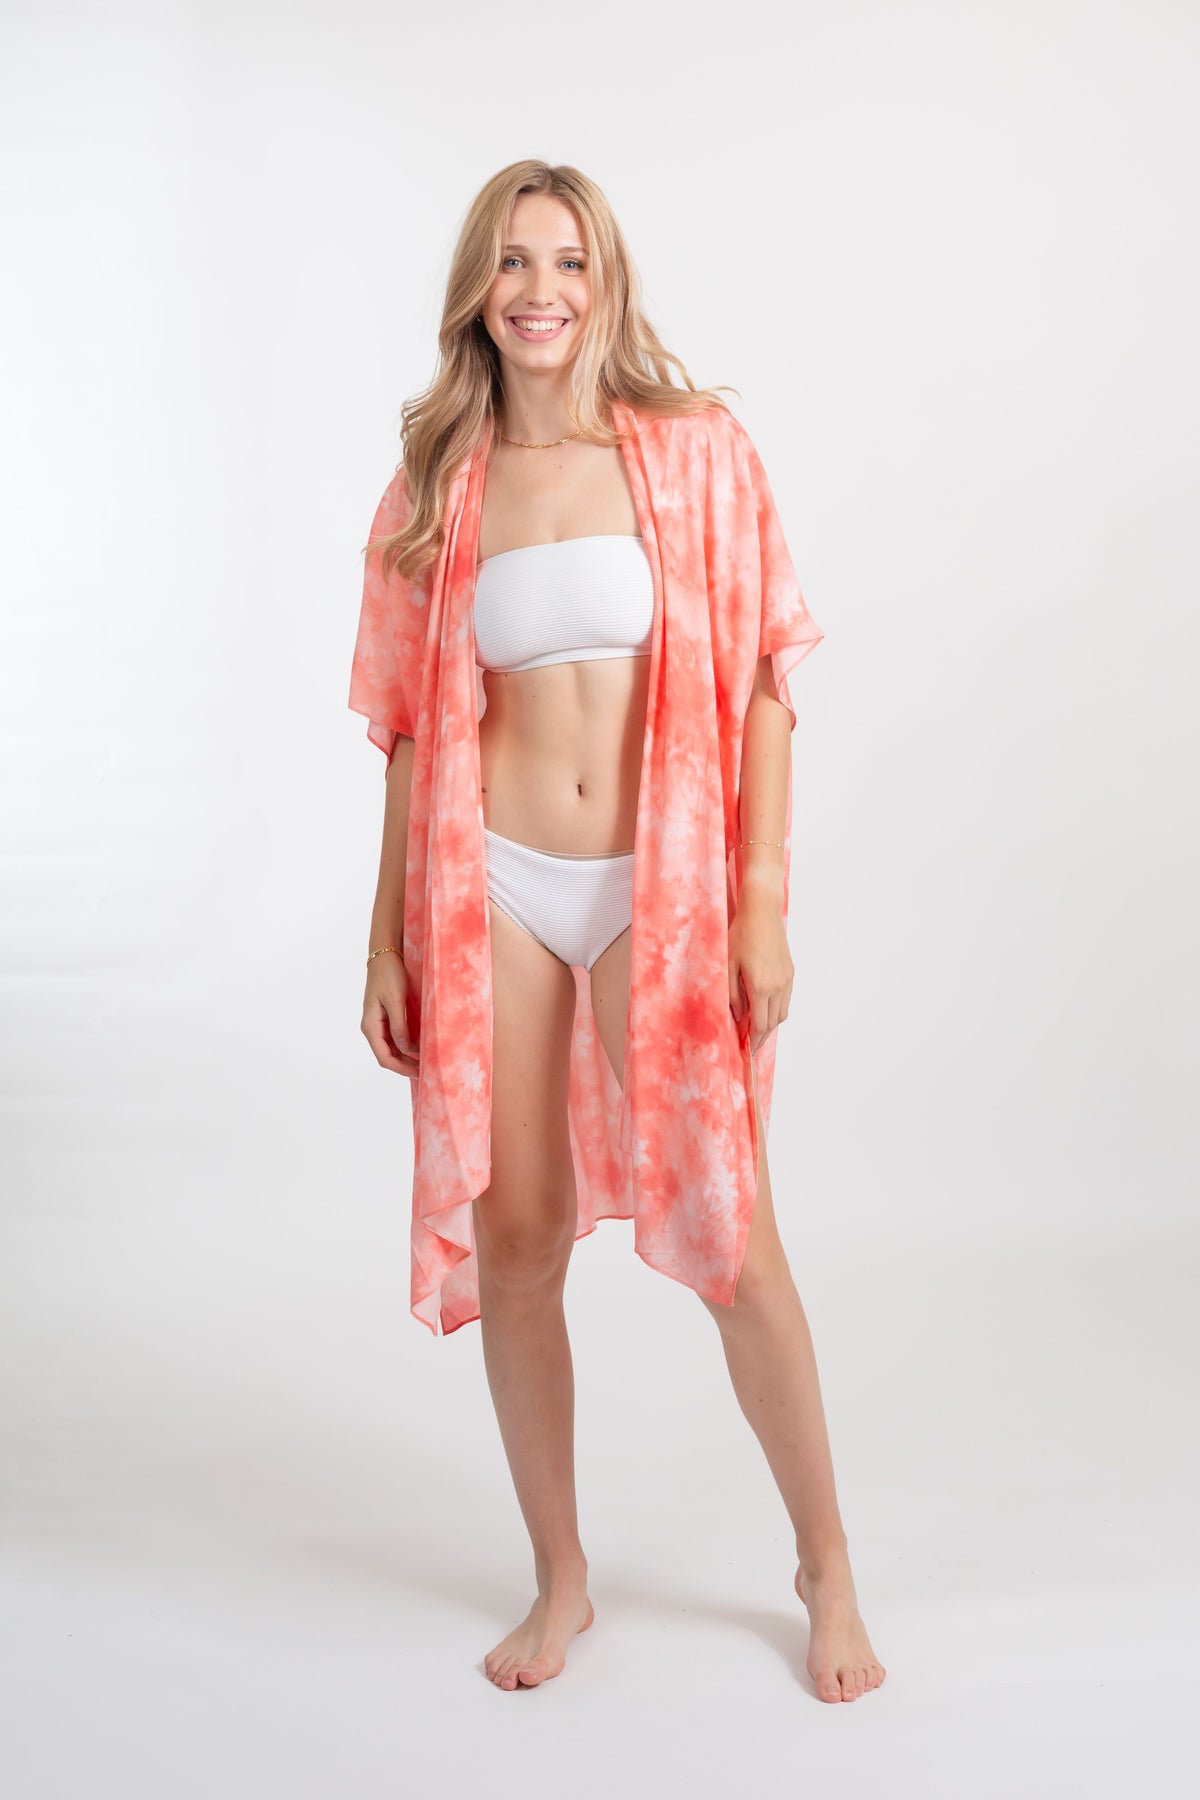 A woman wearing white bandeau two peice white swimsuit with a coral tie-dye print kimono style beach cover up smiling very happy at the camera